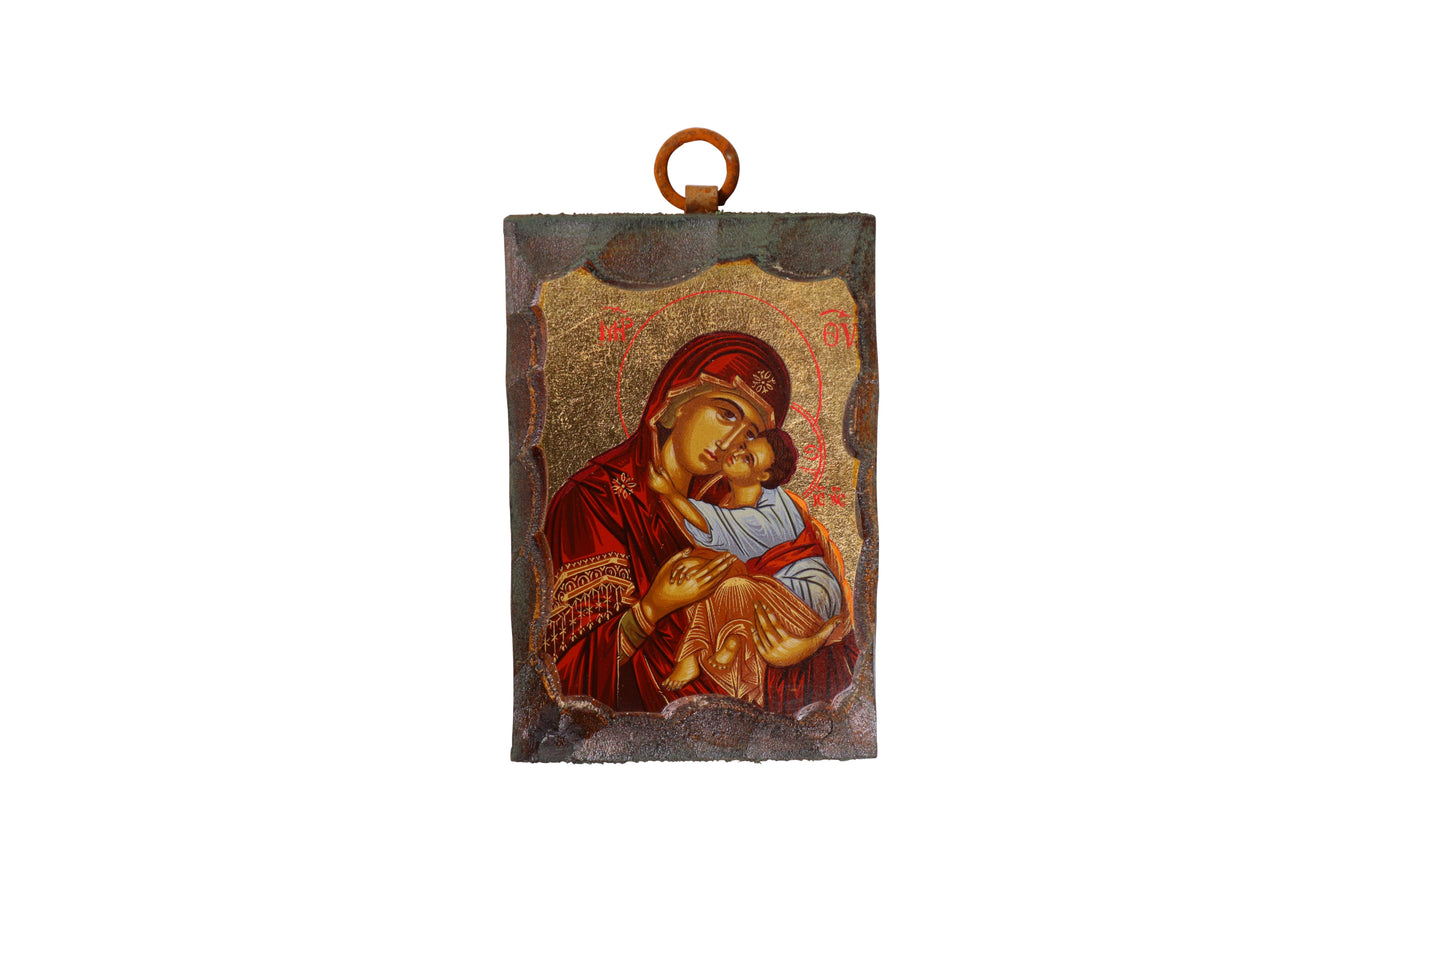 An icon of the Virgin Mary in a red robe holding the child Jesus, with both figures haloed against a gold leaf background. Above them are two angels, and the icon is bordered by a dark, textured frame with a metal loop at the top for hanging.